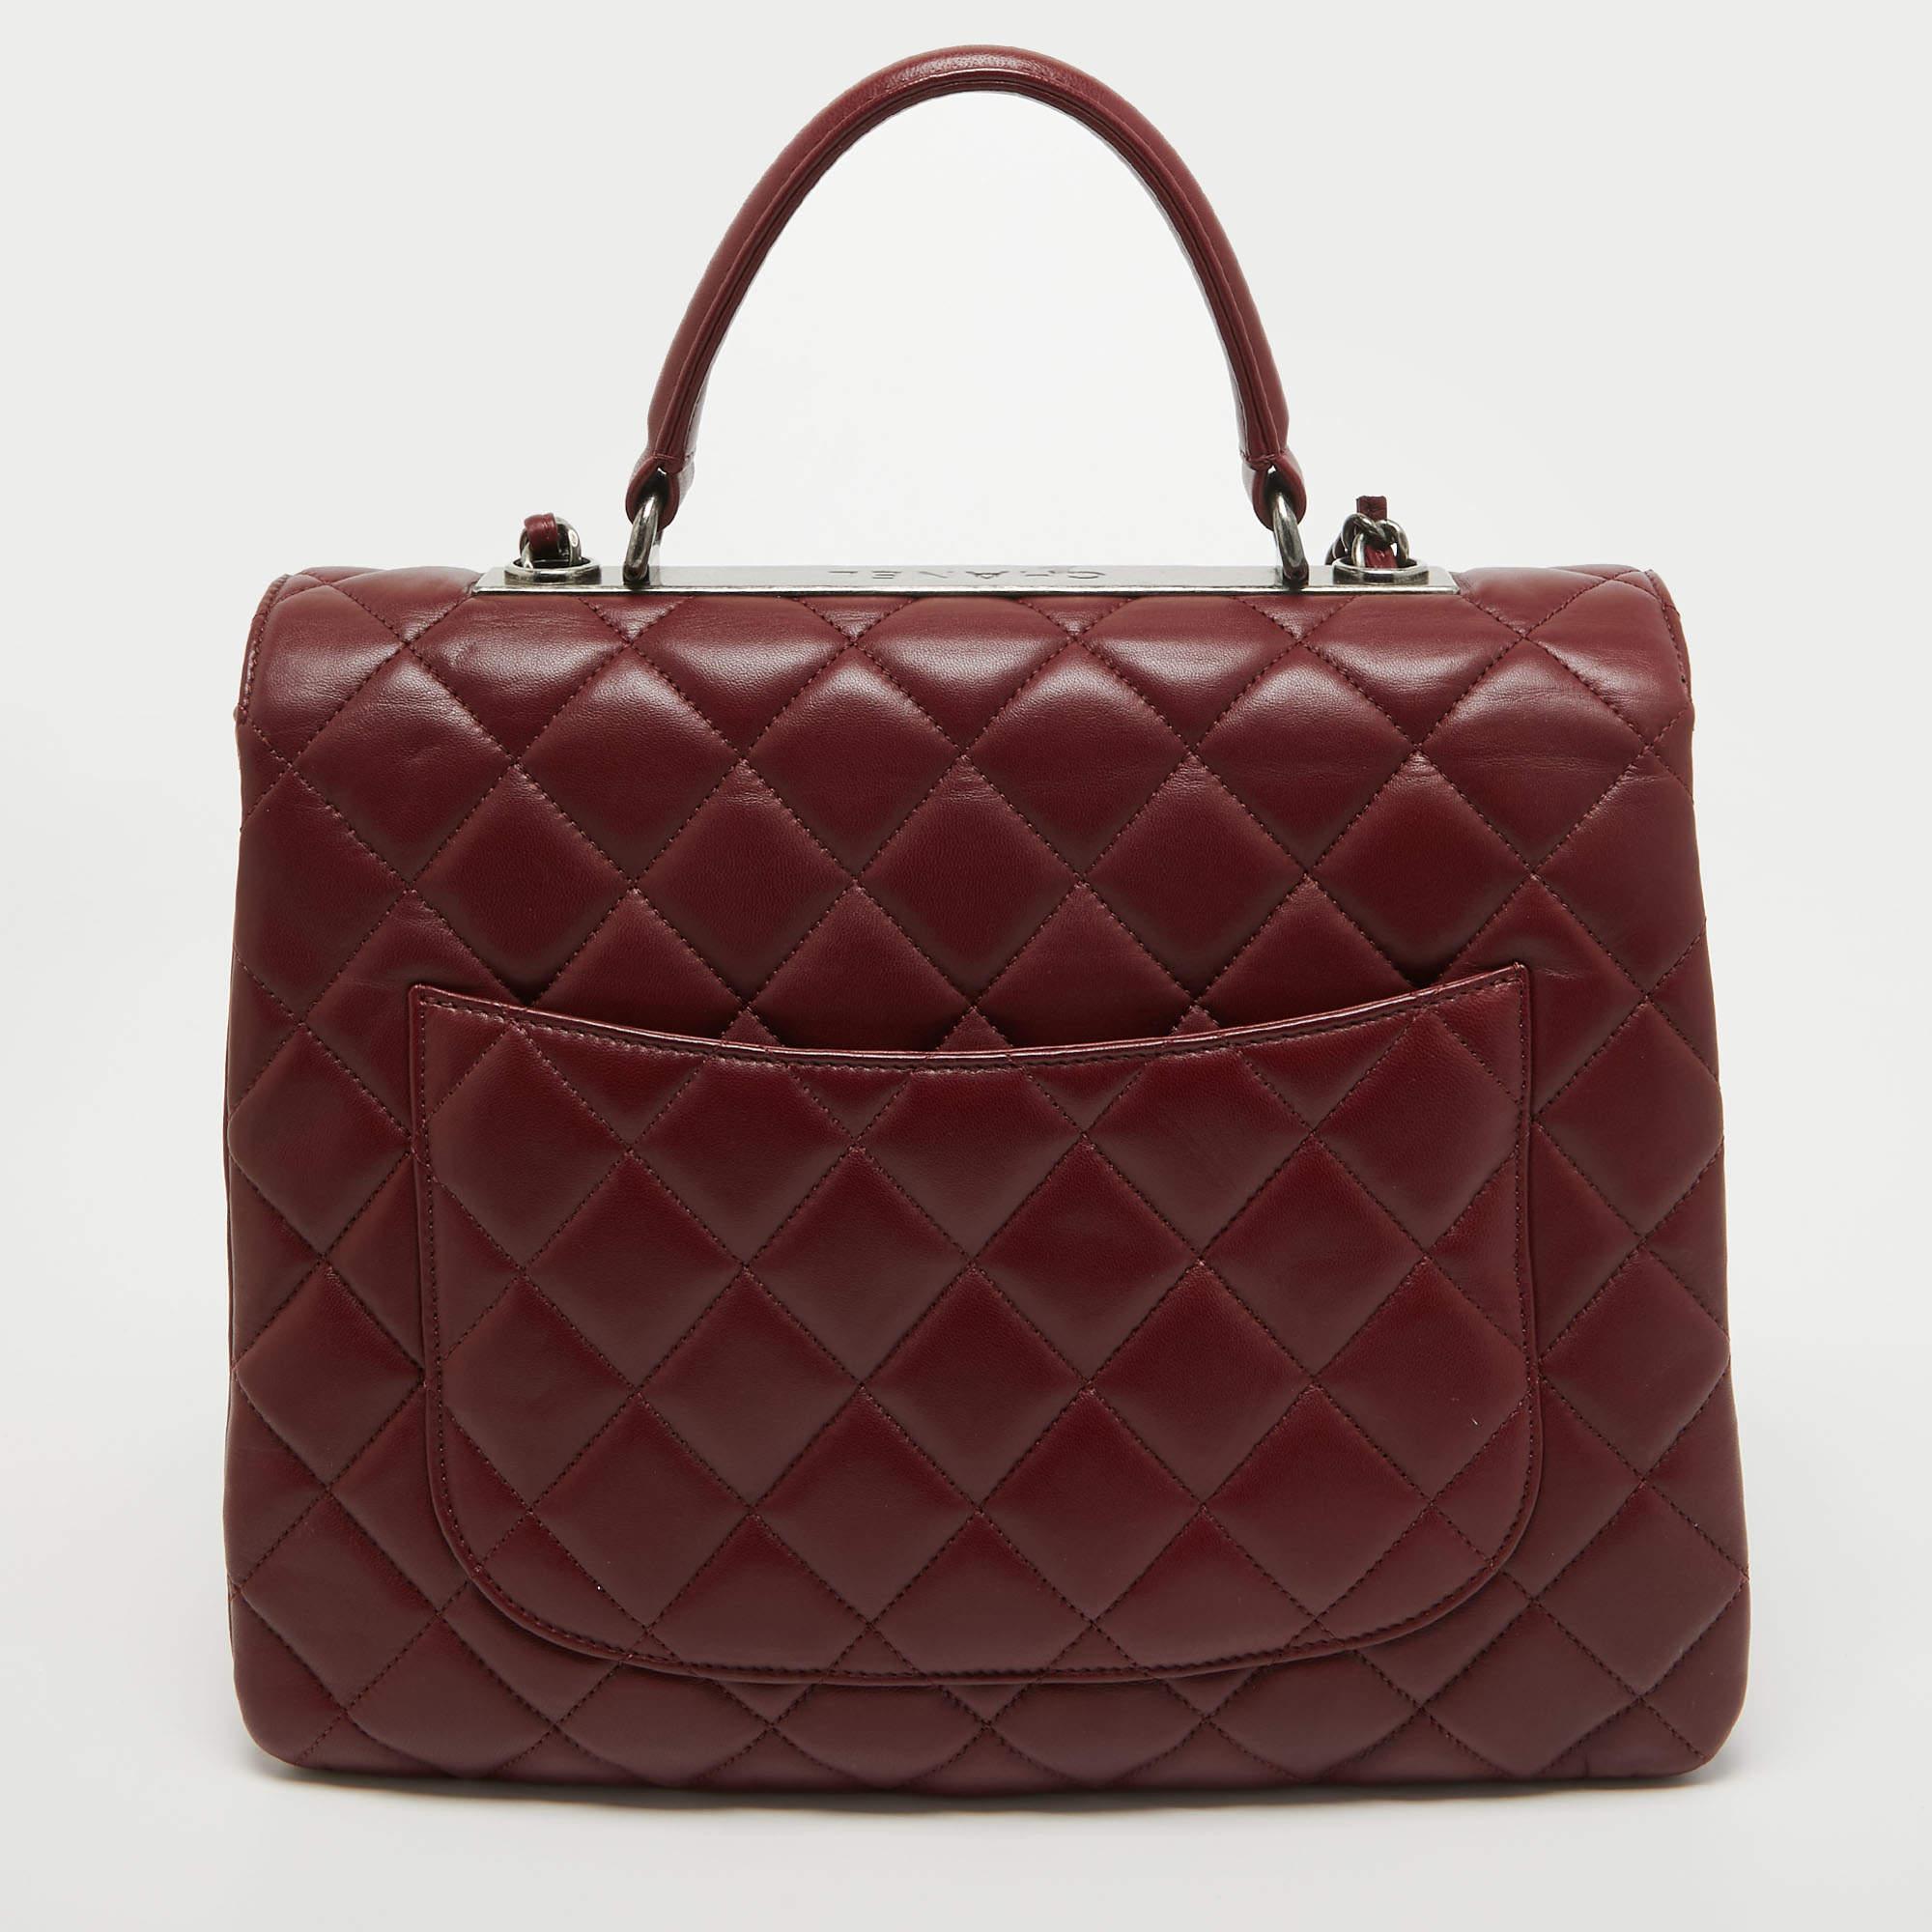 Chanel Dark Red Quilted Leather Large Trendy CC Top Handle Bag For Sale 1